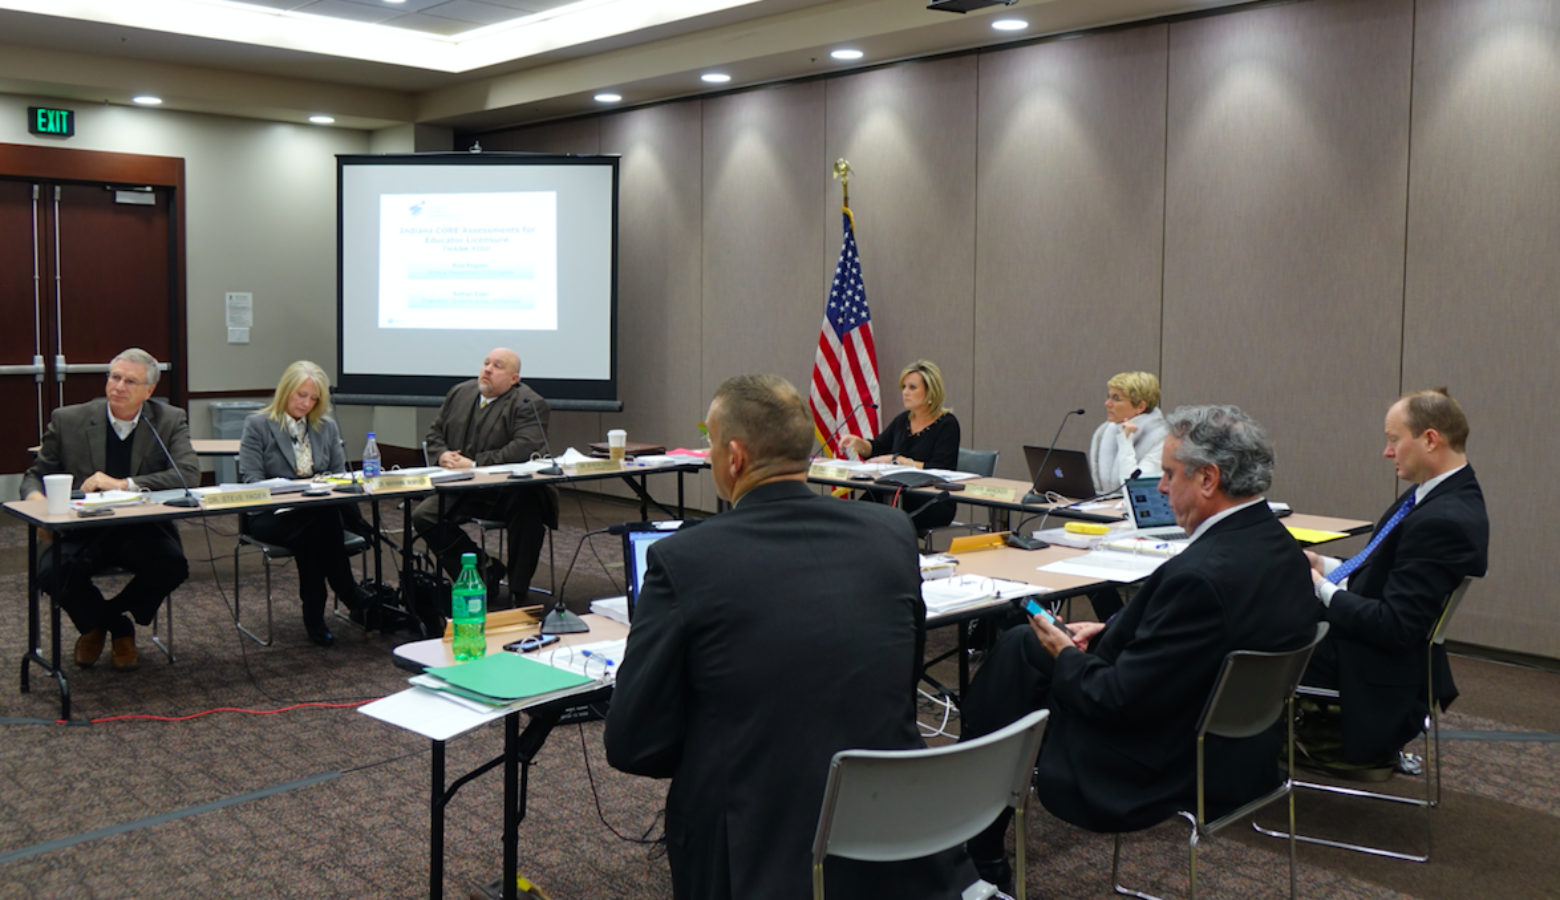 The State Board of Education in session during its first regular meeting of 2017 on January 11 in the Indiana Government Center South in Indianapolis. (Eric Weddle/WFYI Public Media)